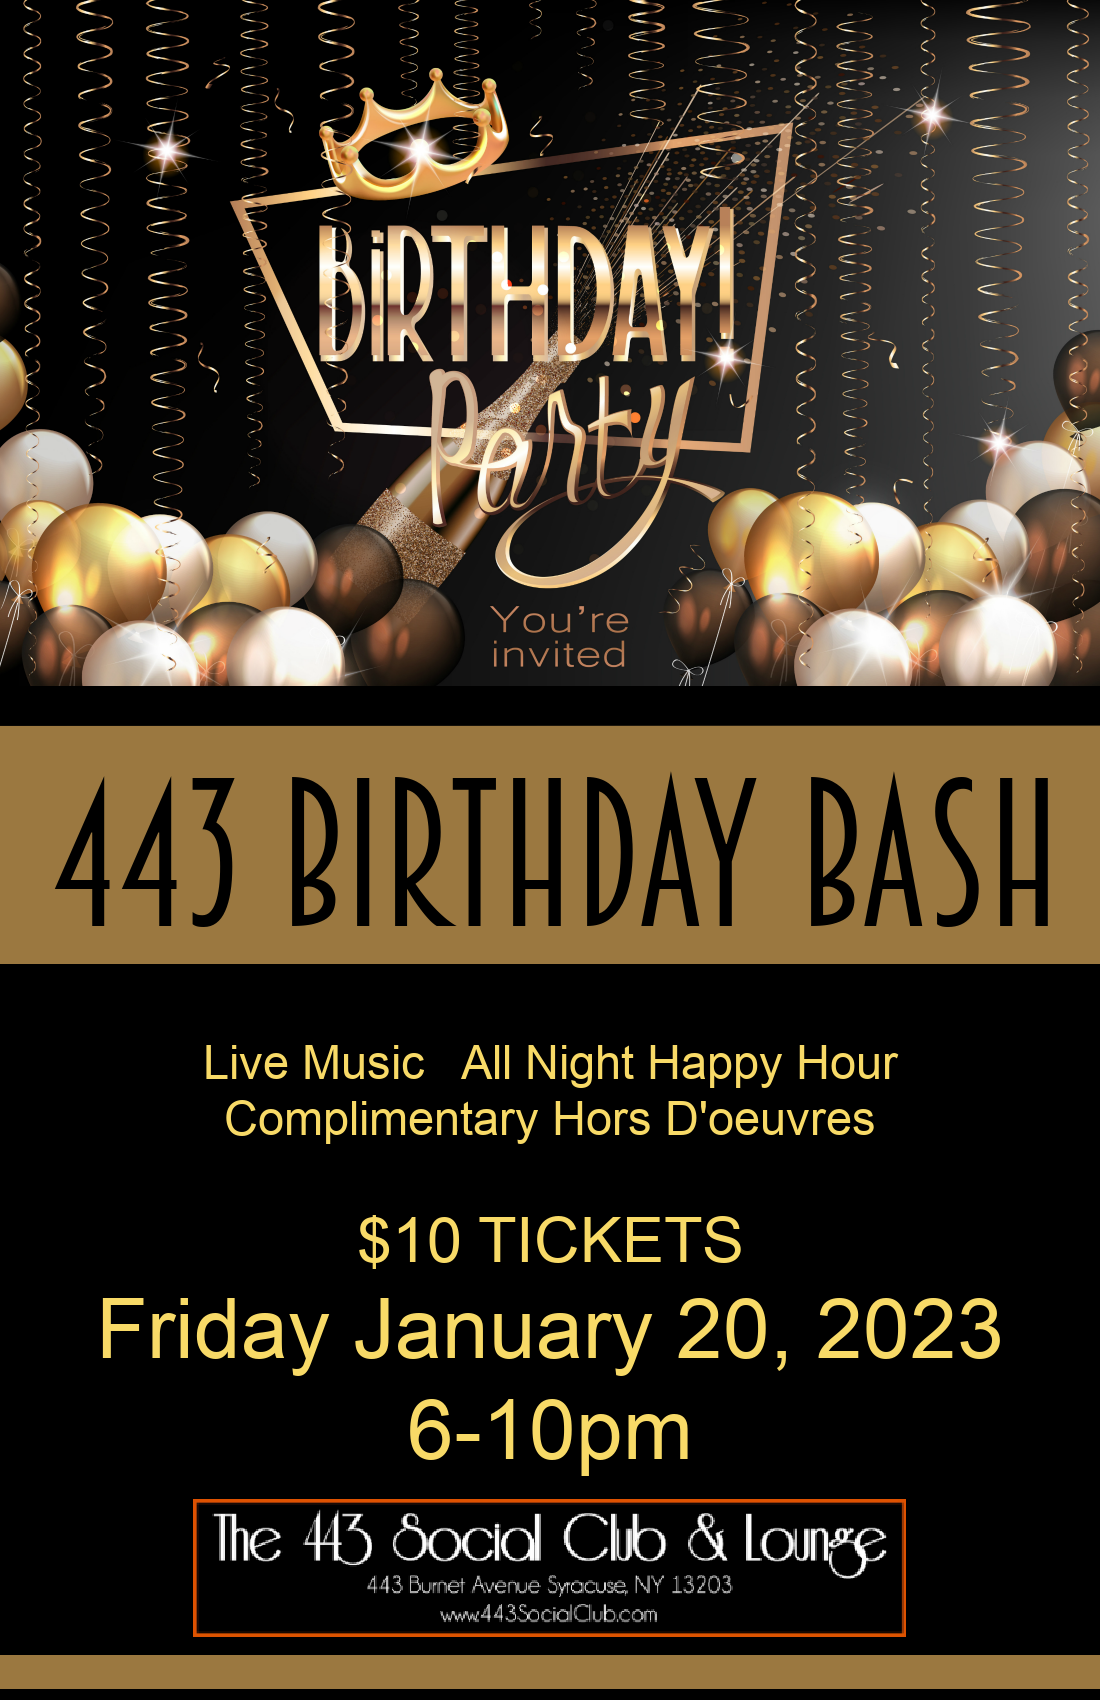 The 443 Birthday Bash with The Malcontents 1/20 The 443 Social Club